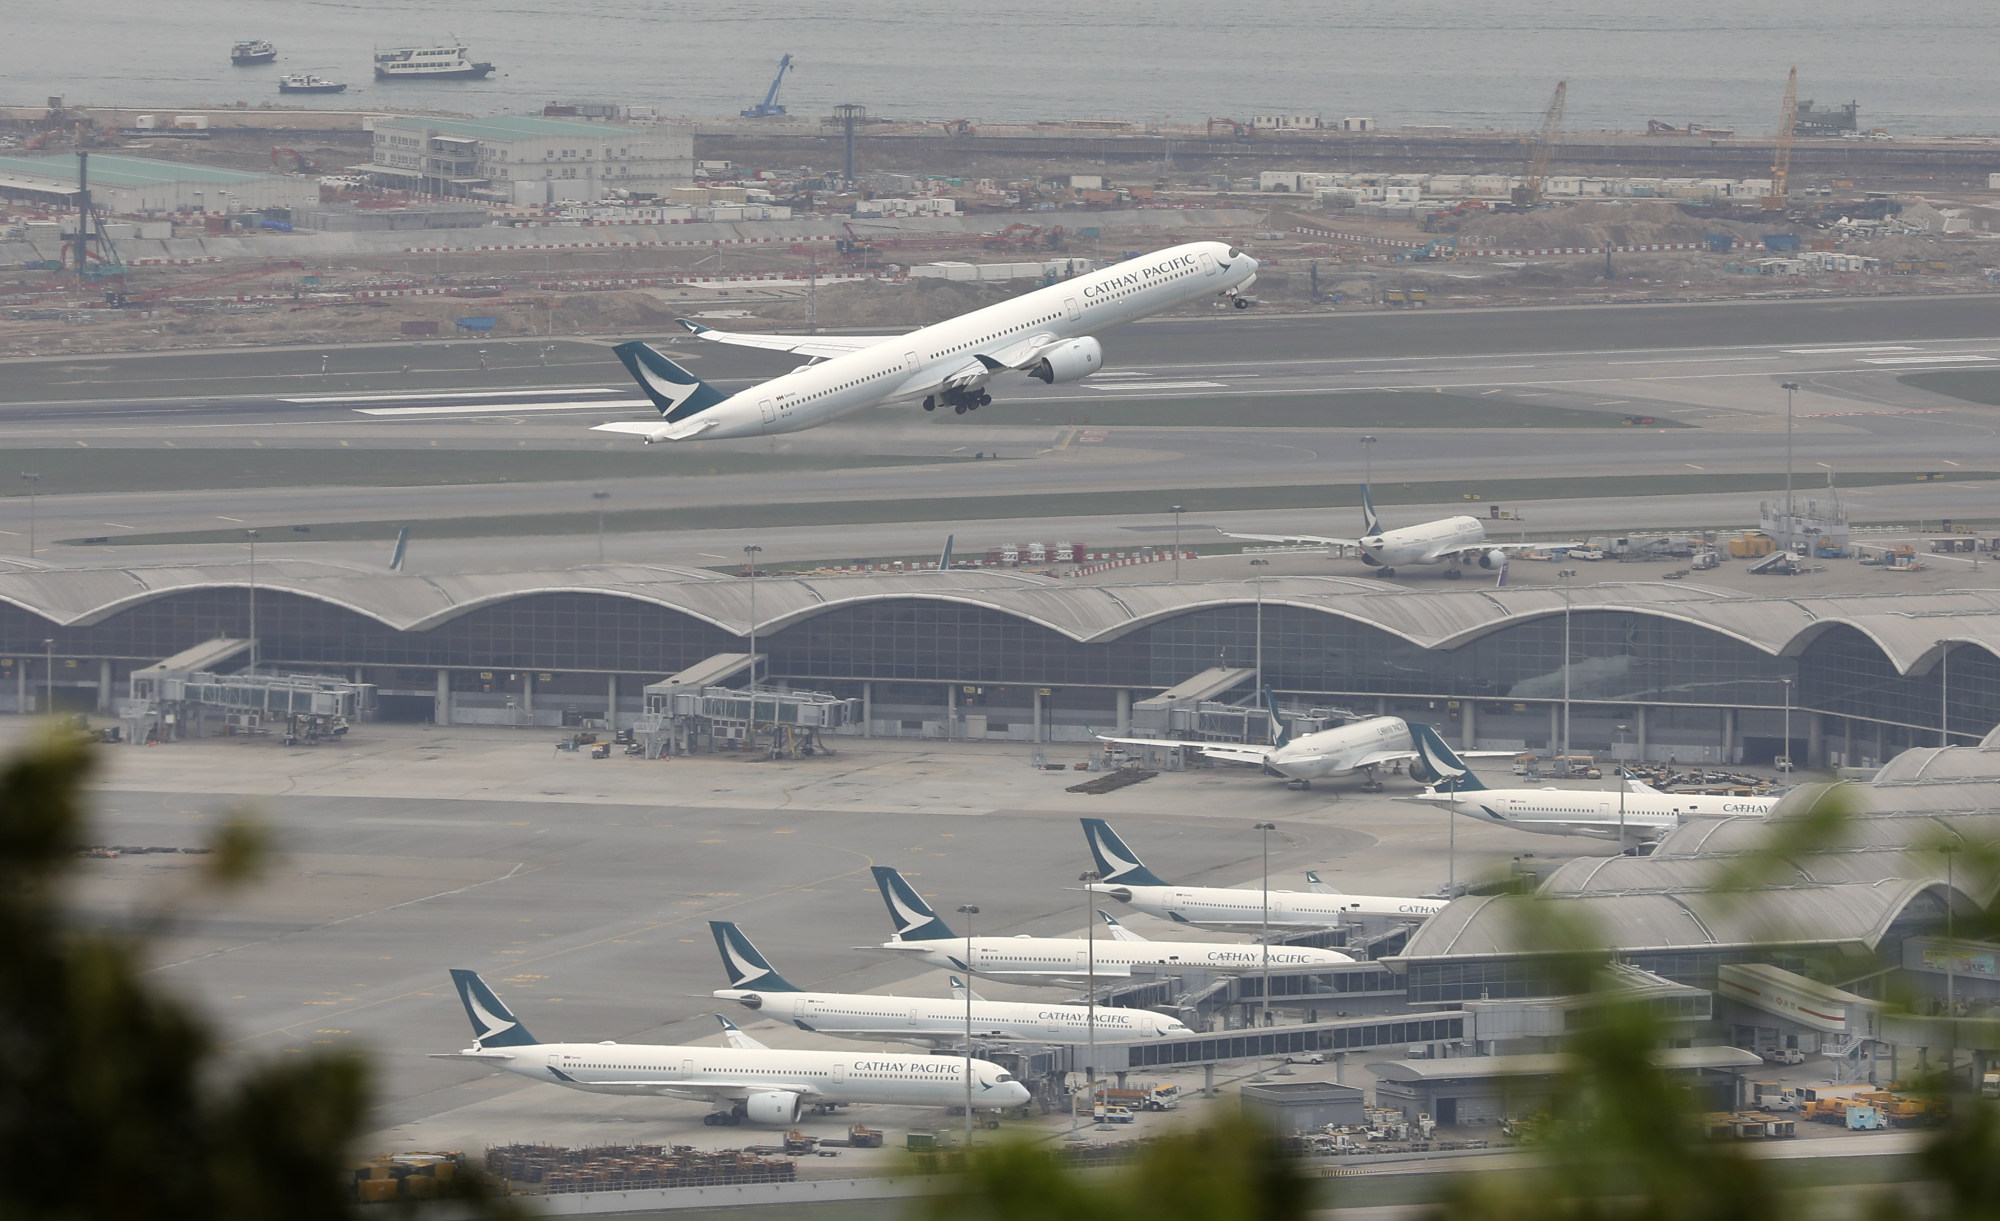 cathay pacific for first time offers airfare discounts to hong kong voters in mainland china returning for district council poll